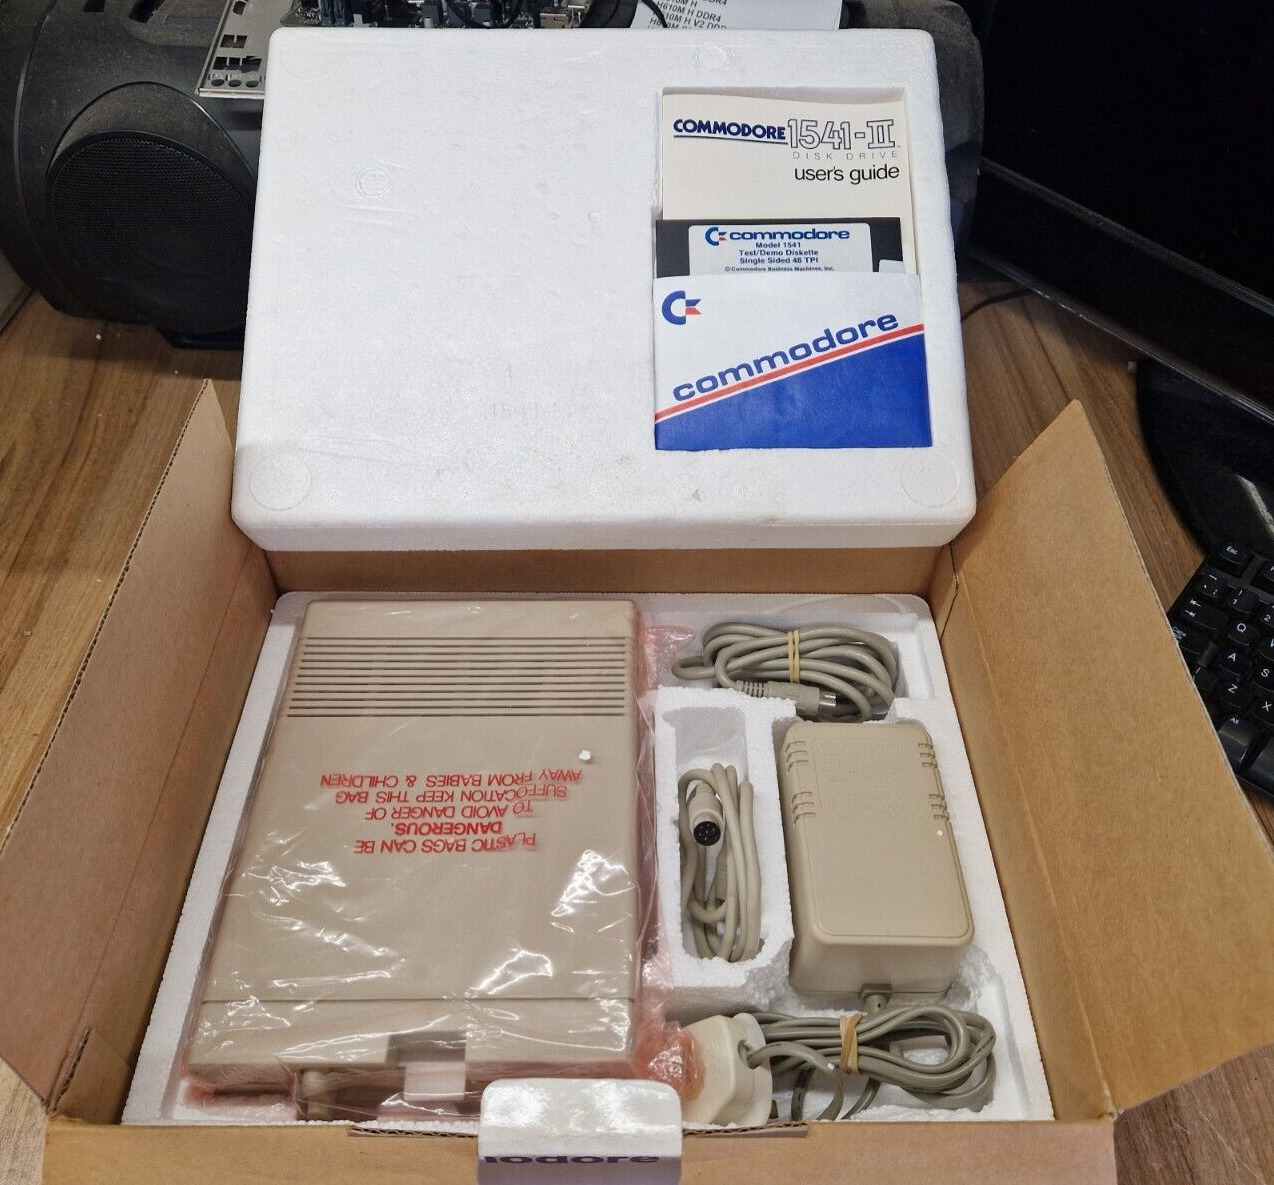 Boxed Commodore 1541-II Disc drive Surperb Condition Boxed Original Seal intact